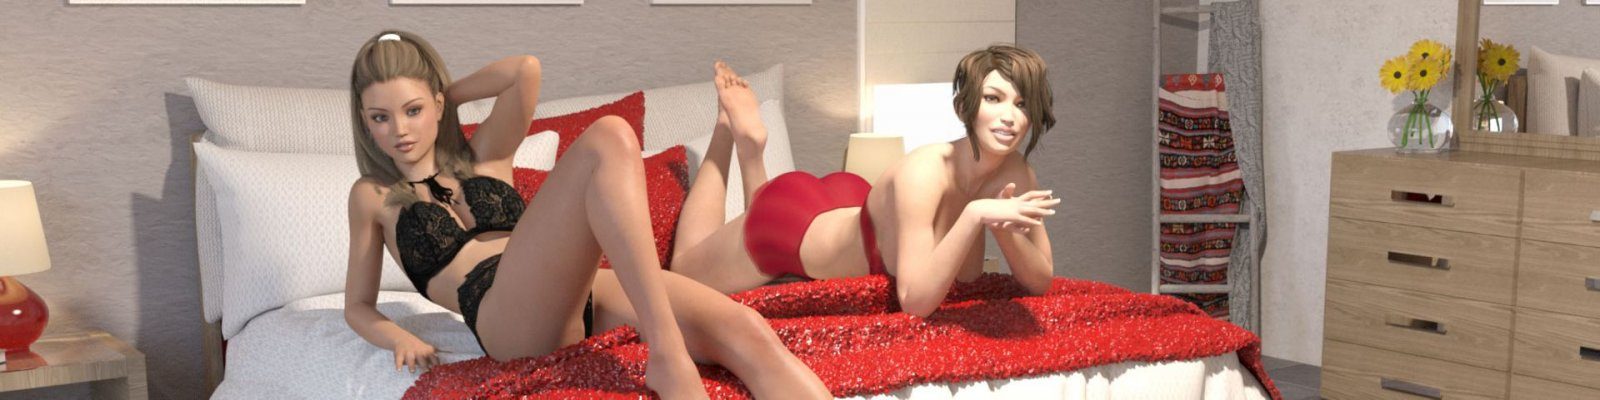 The Gift Reloaded [Mrzz] Adult xxx Game Download